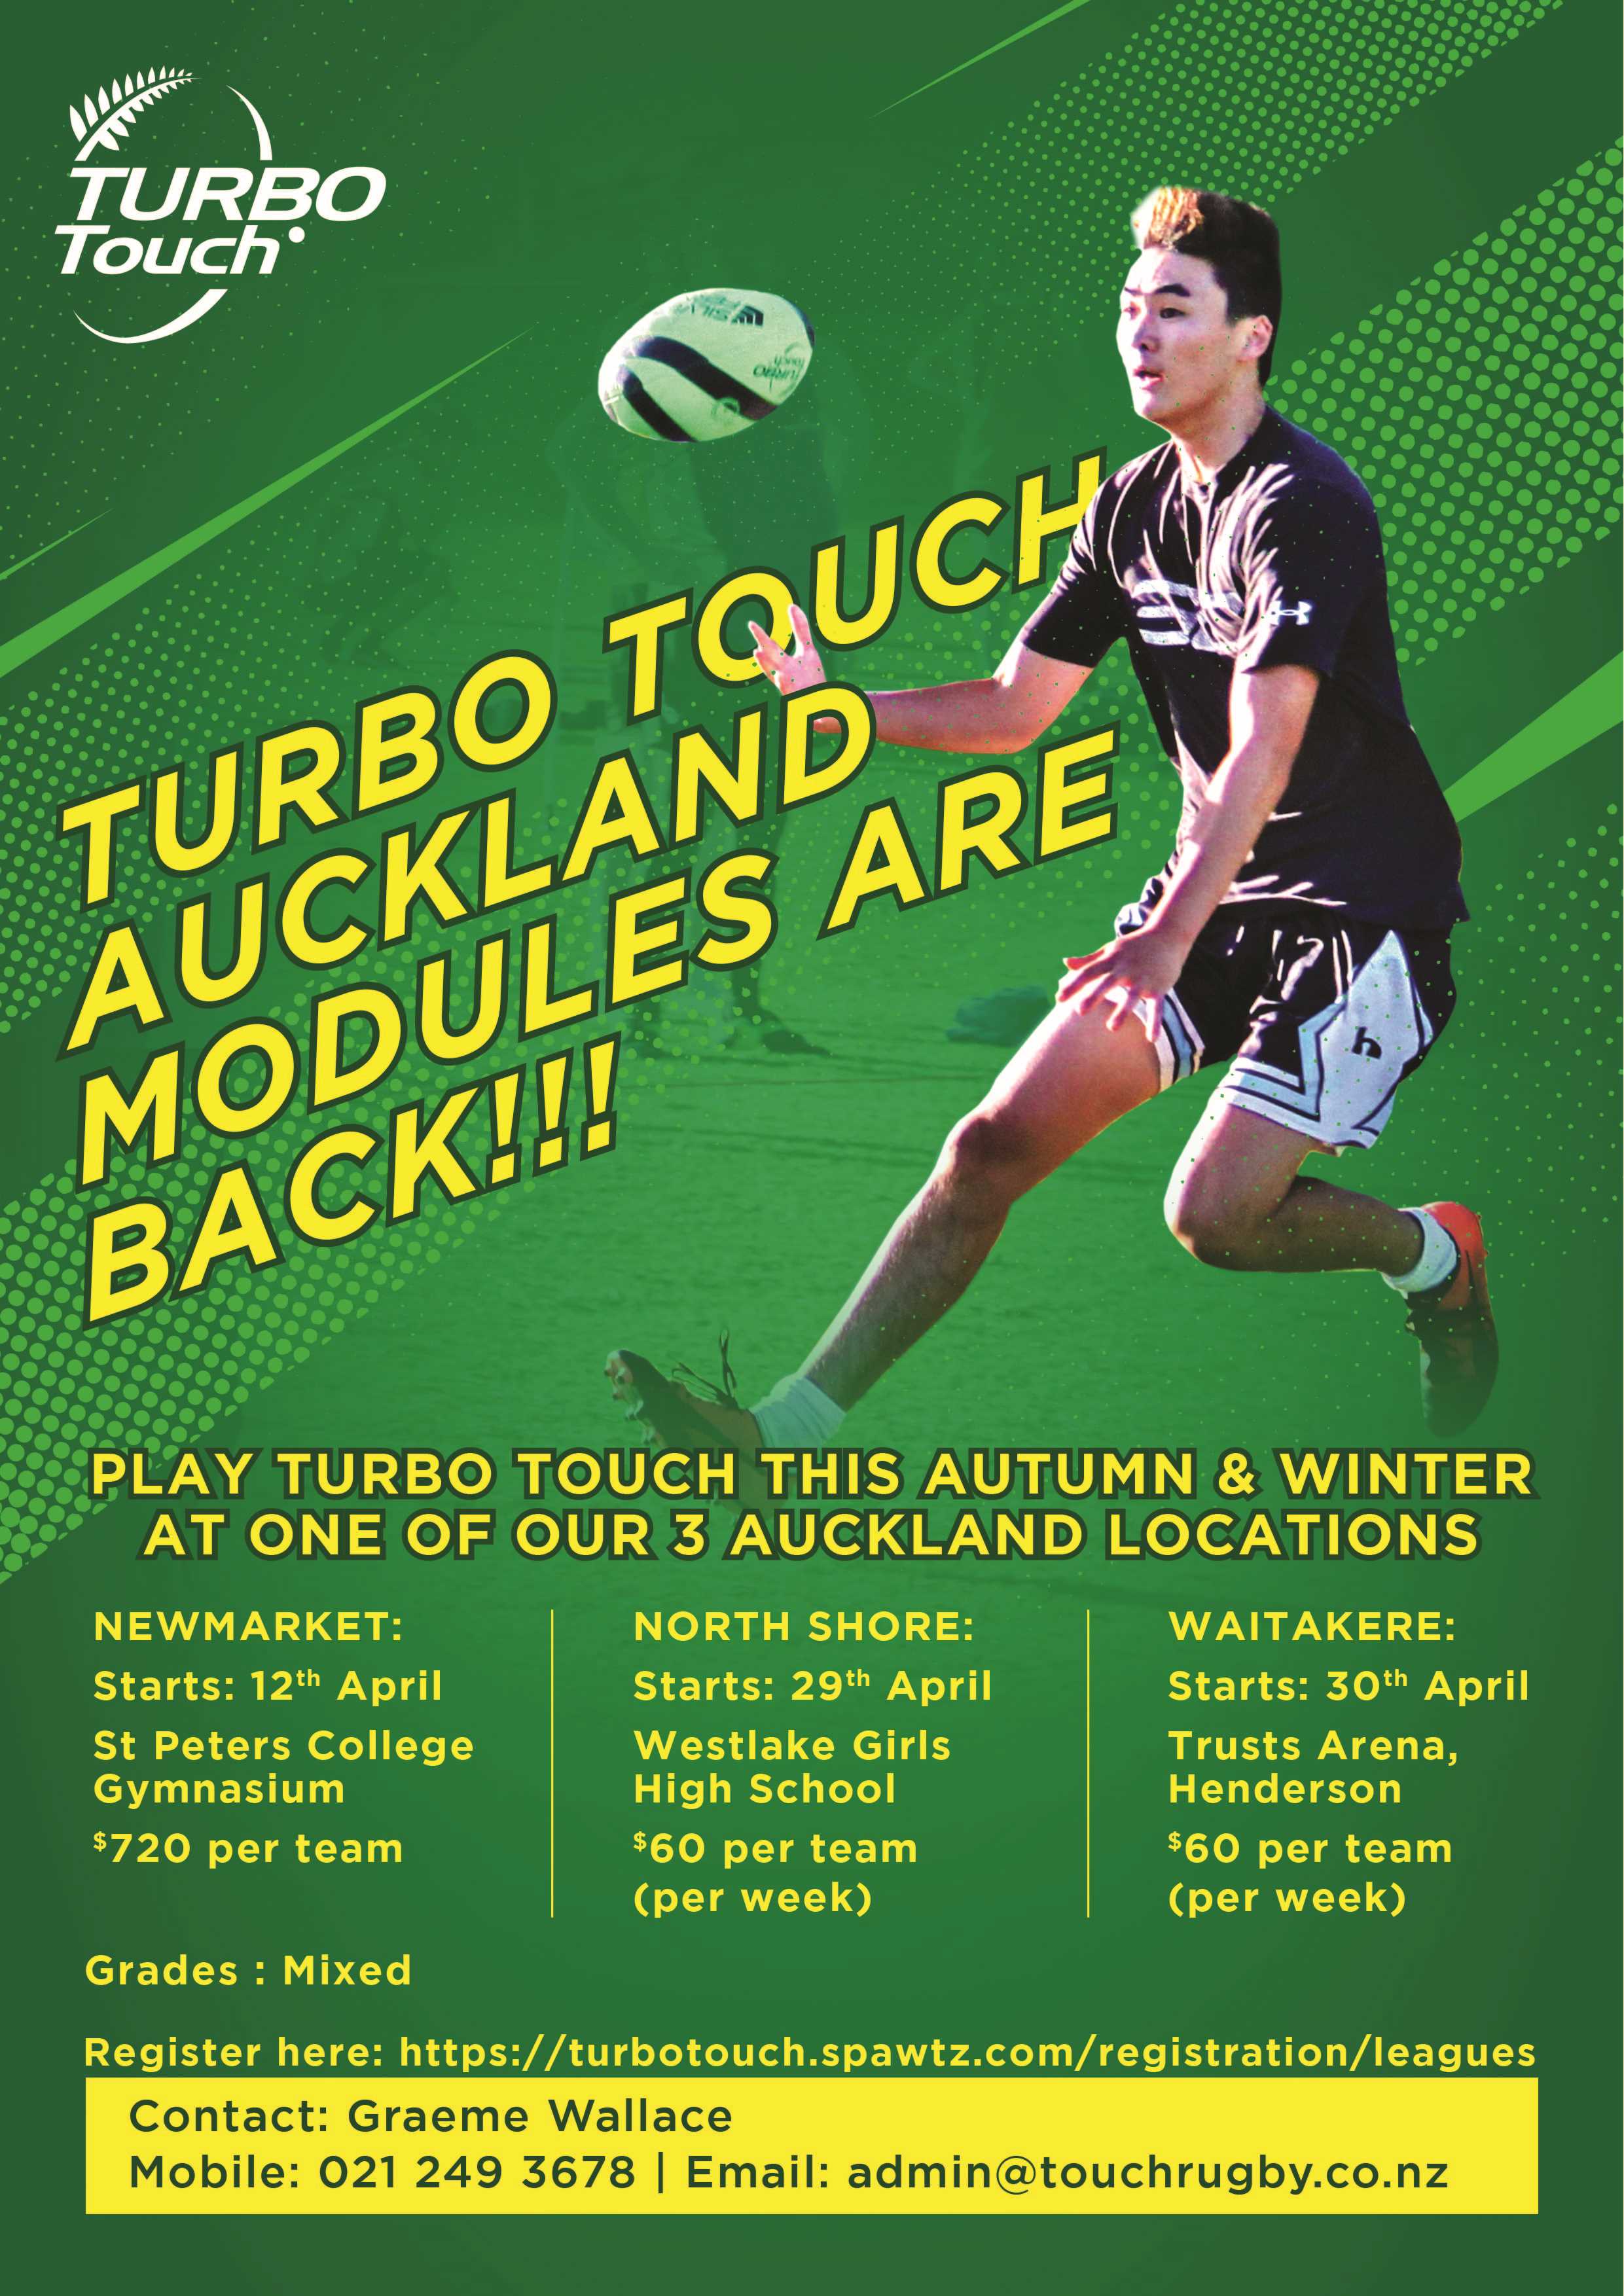 DJ03625 Turbo Touch Auckland Modules Are Back!!!